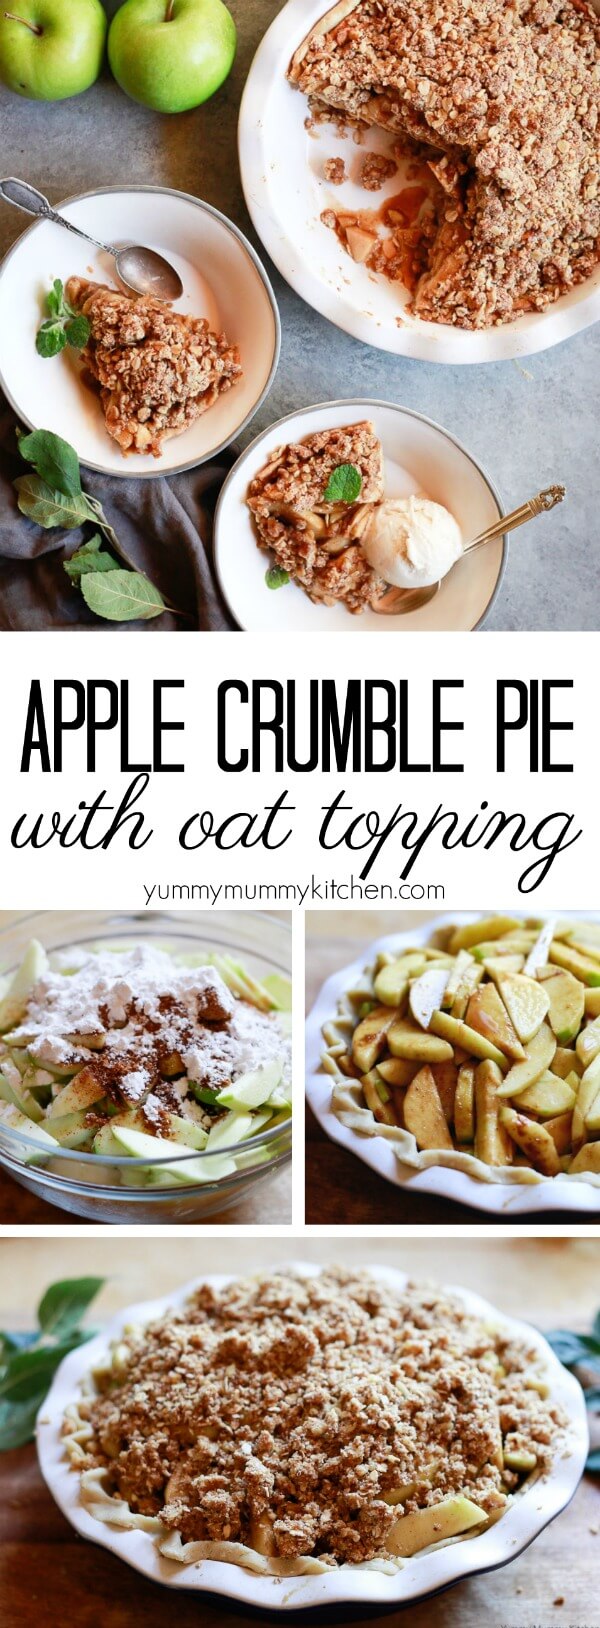 An easy apple crumble pie recipe with an oat topping. Apple crumble pie is easy to make vegan or gluten-free, and is perfect for Thanksgiving and Christmas.